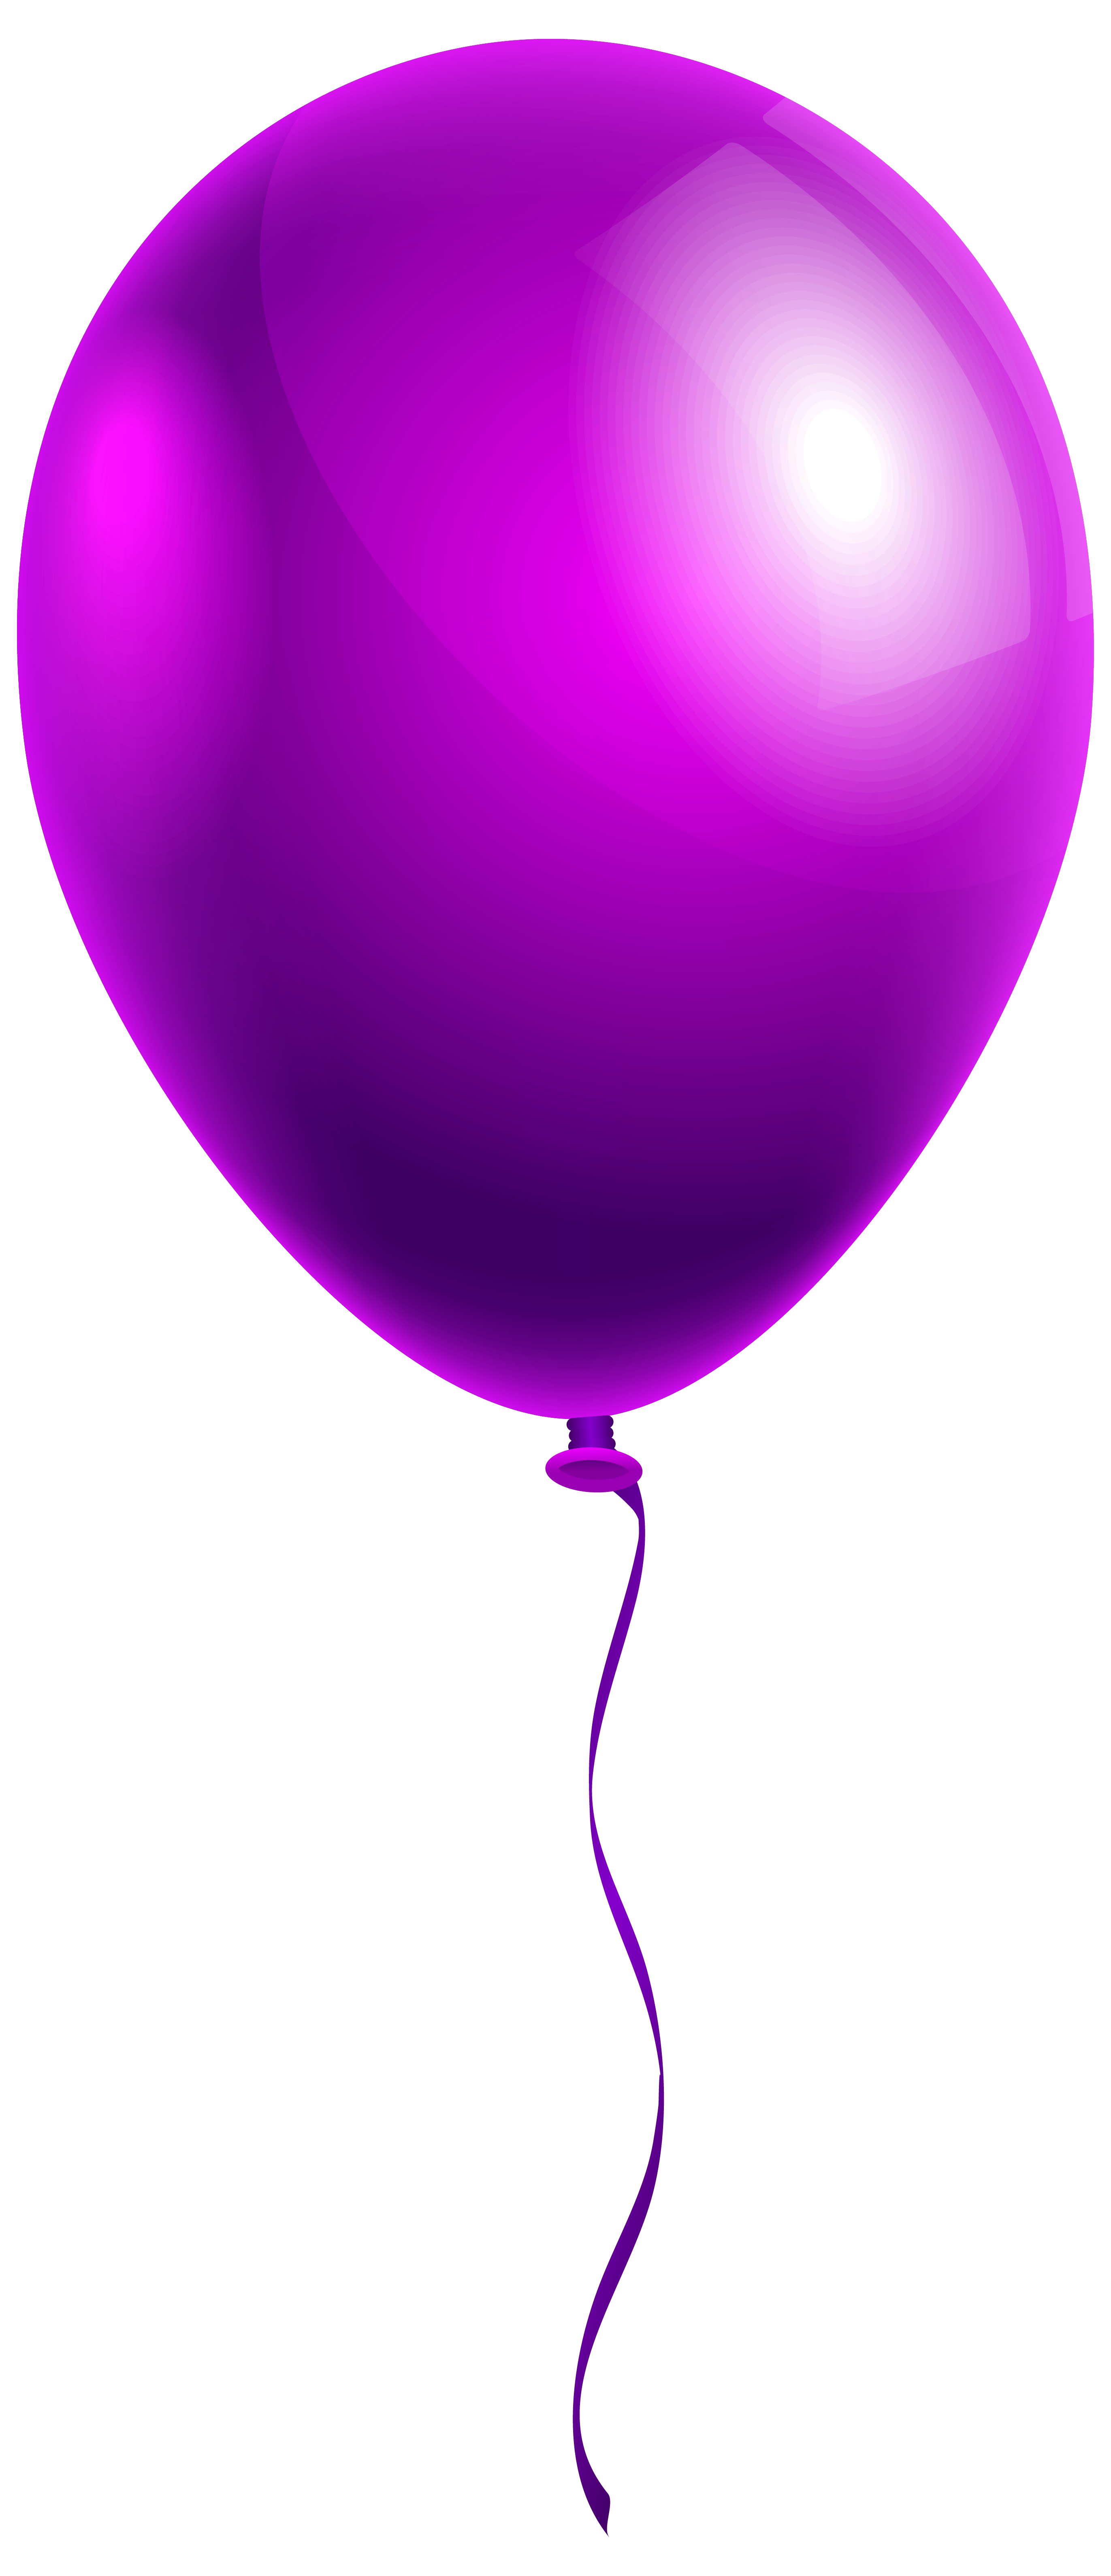 Single Purple Balloon PNG Clipart Image | Gallery Yopriceville - High ...